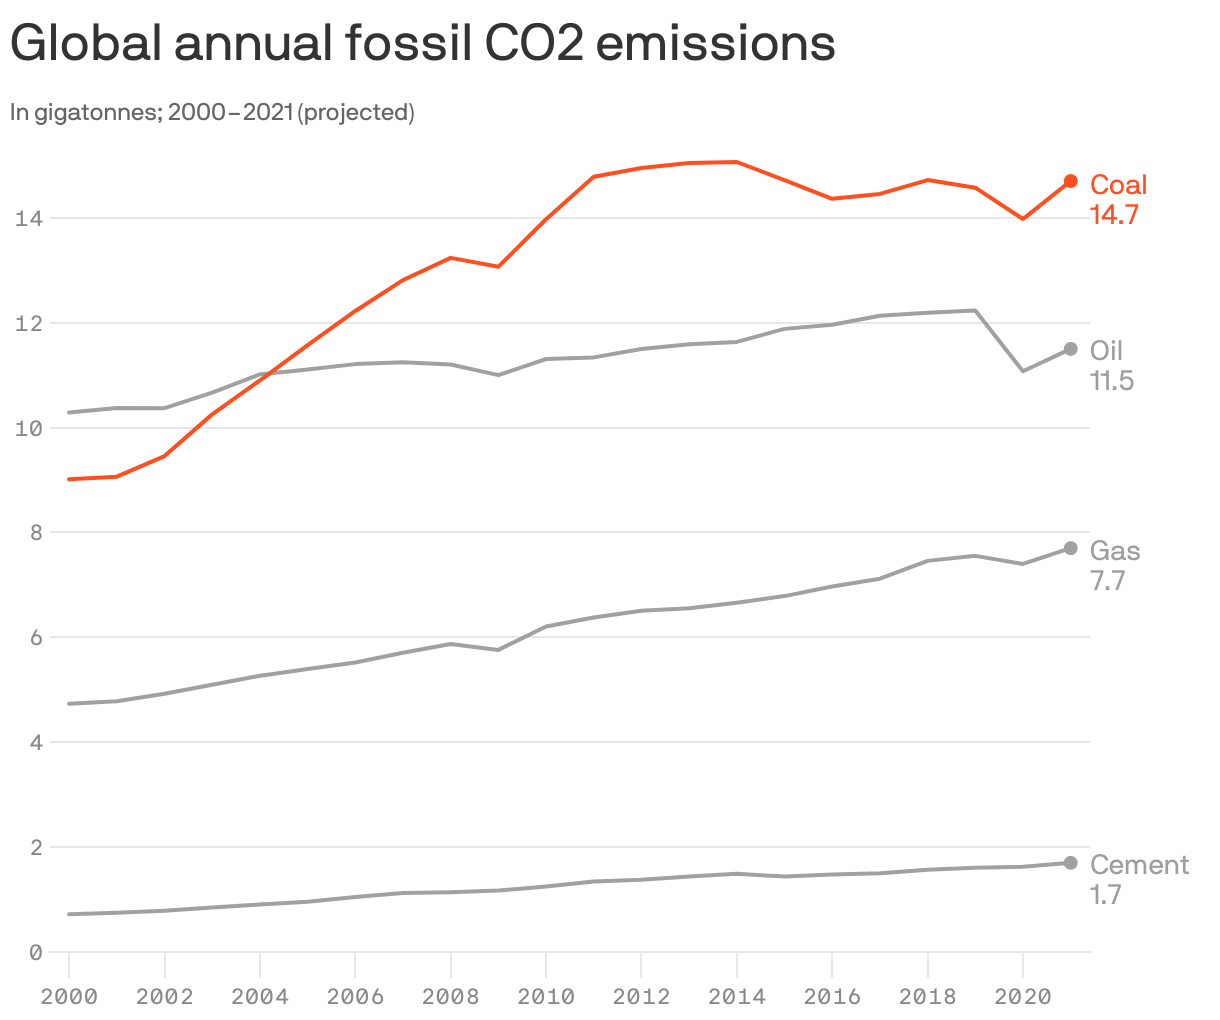 Global annual fossil CO2 emissions